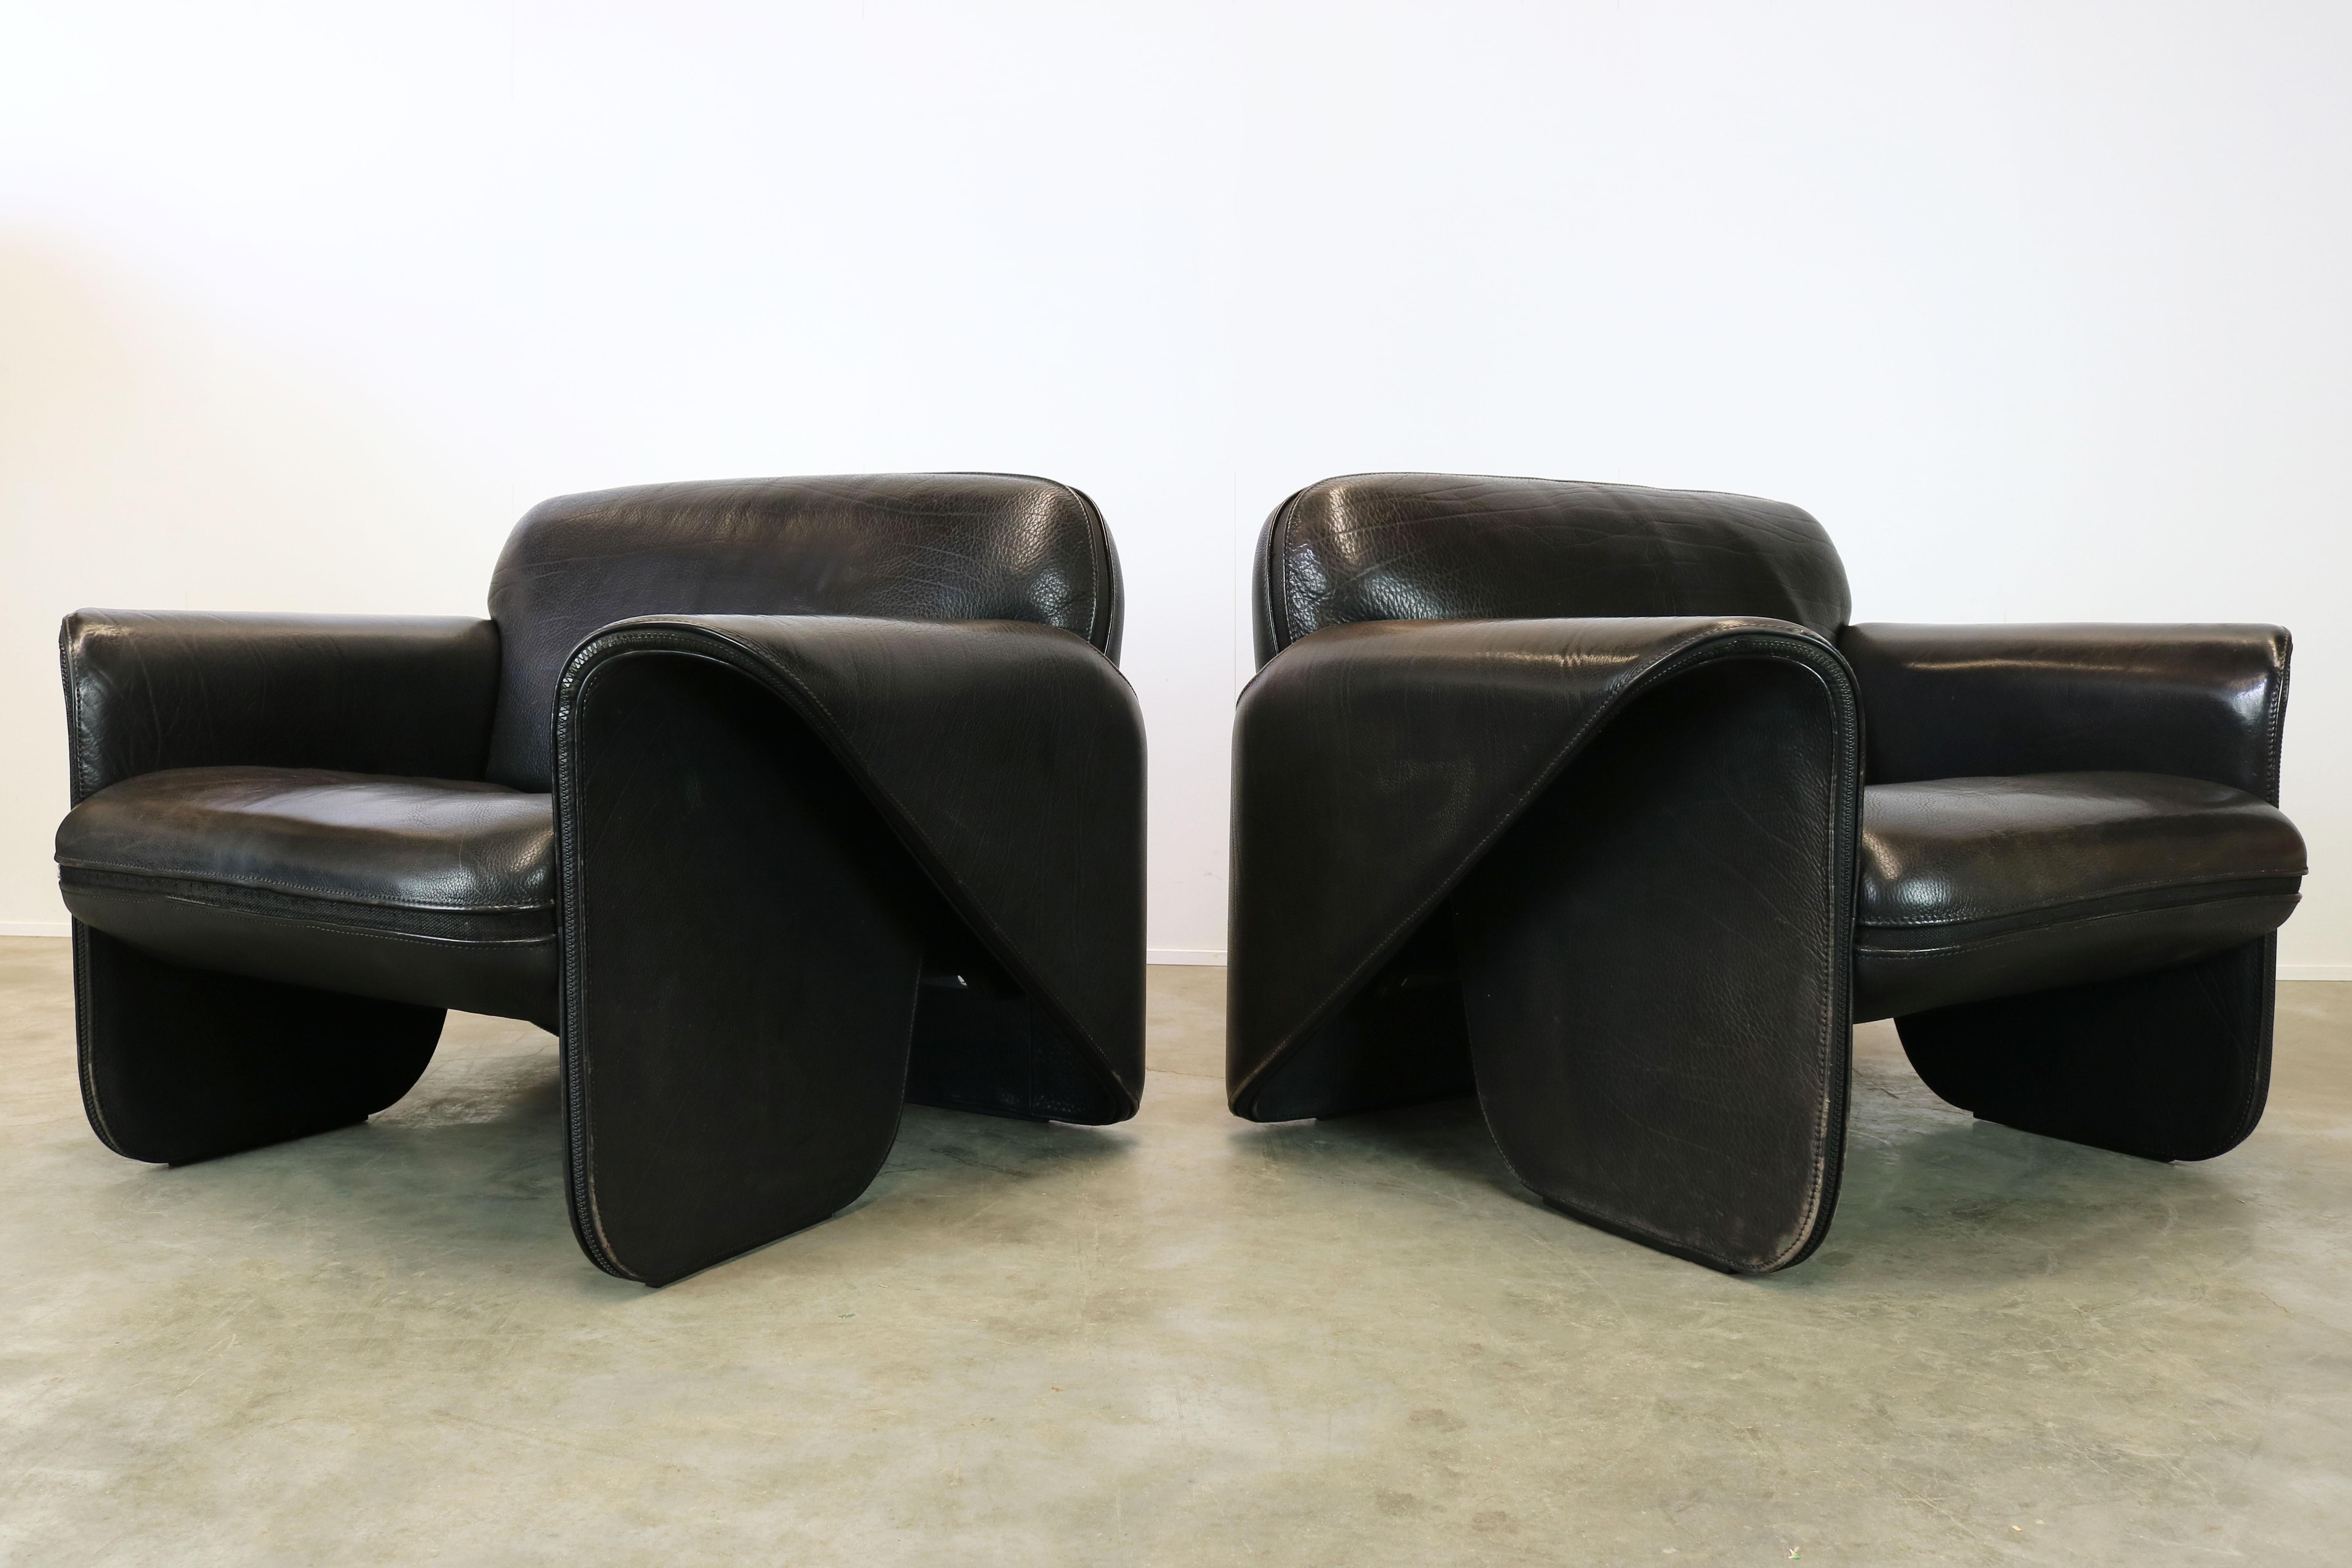 Rare Pair of Swiss De Sede Ds 125 Lounge Chairs by Gerd Lange 1978 Black Leather 5